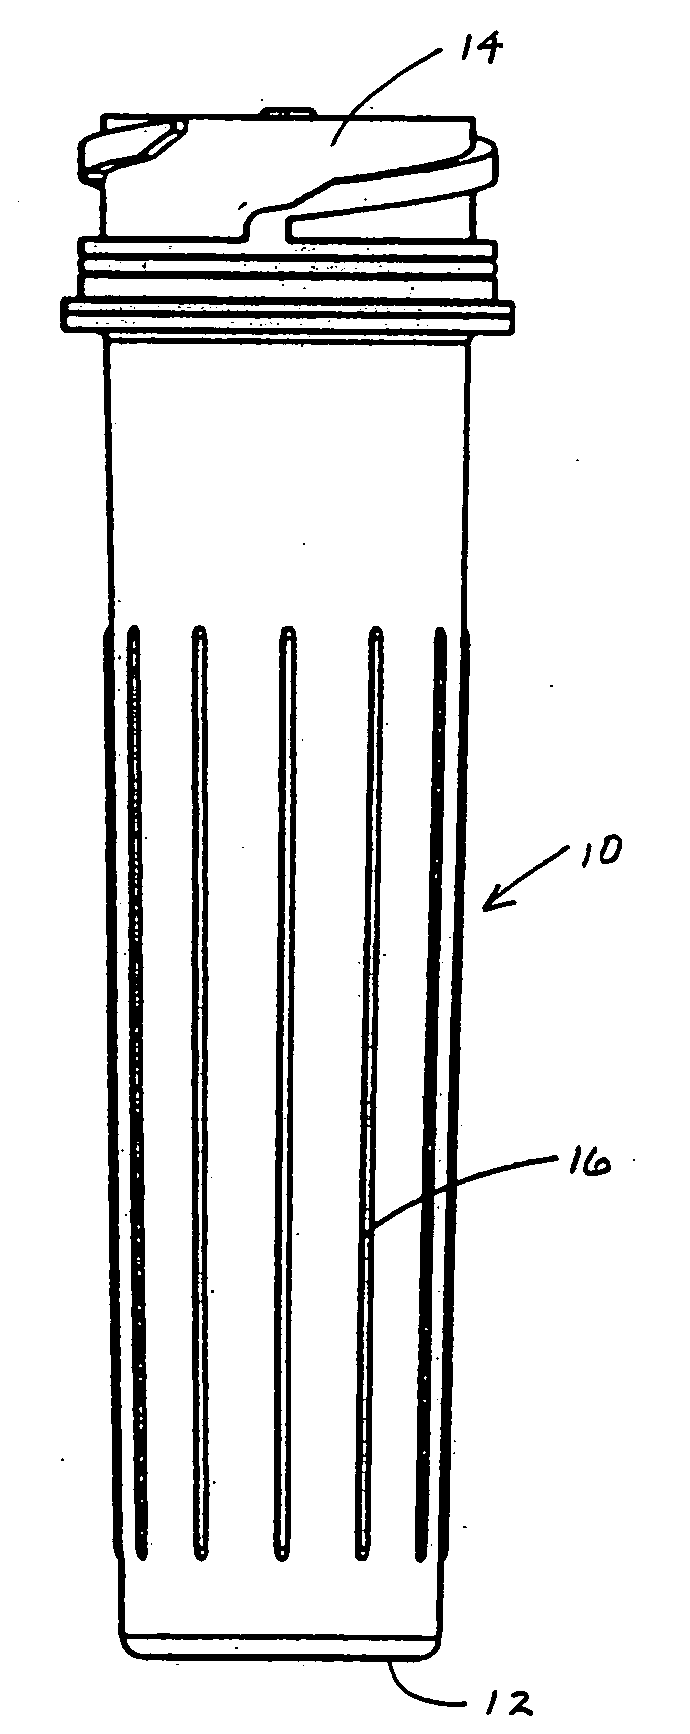 Power source and electronic device assembly